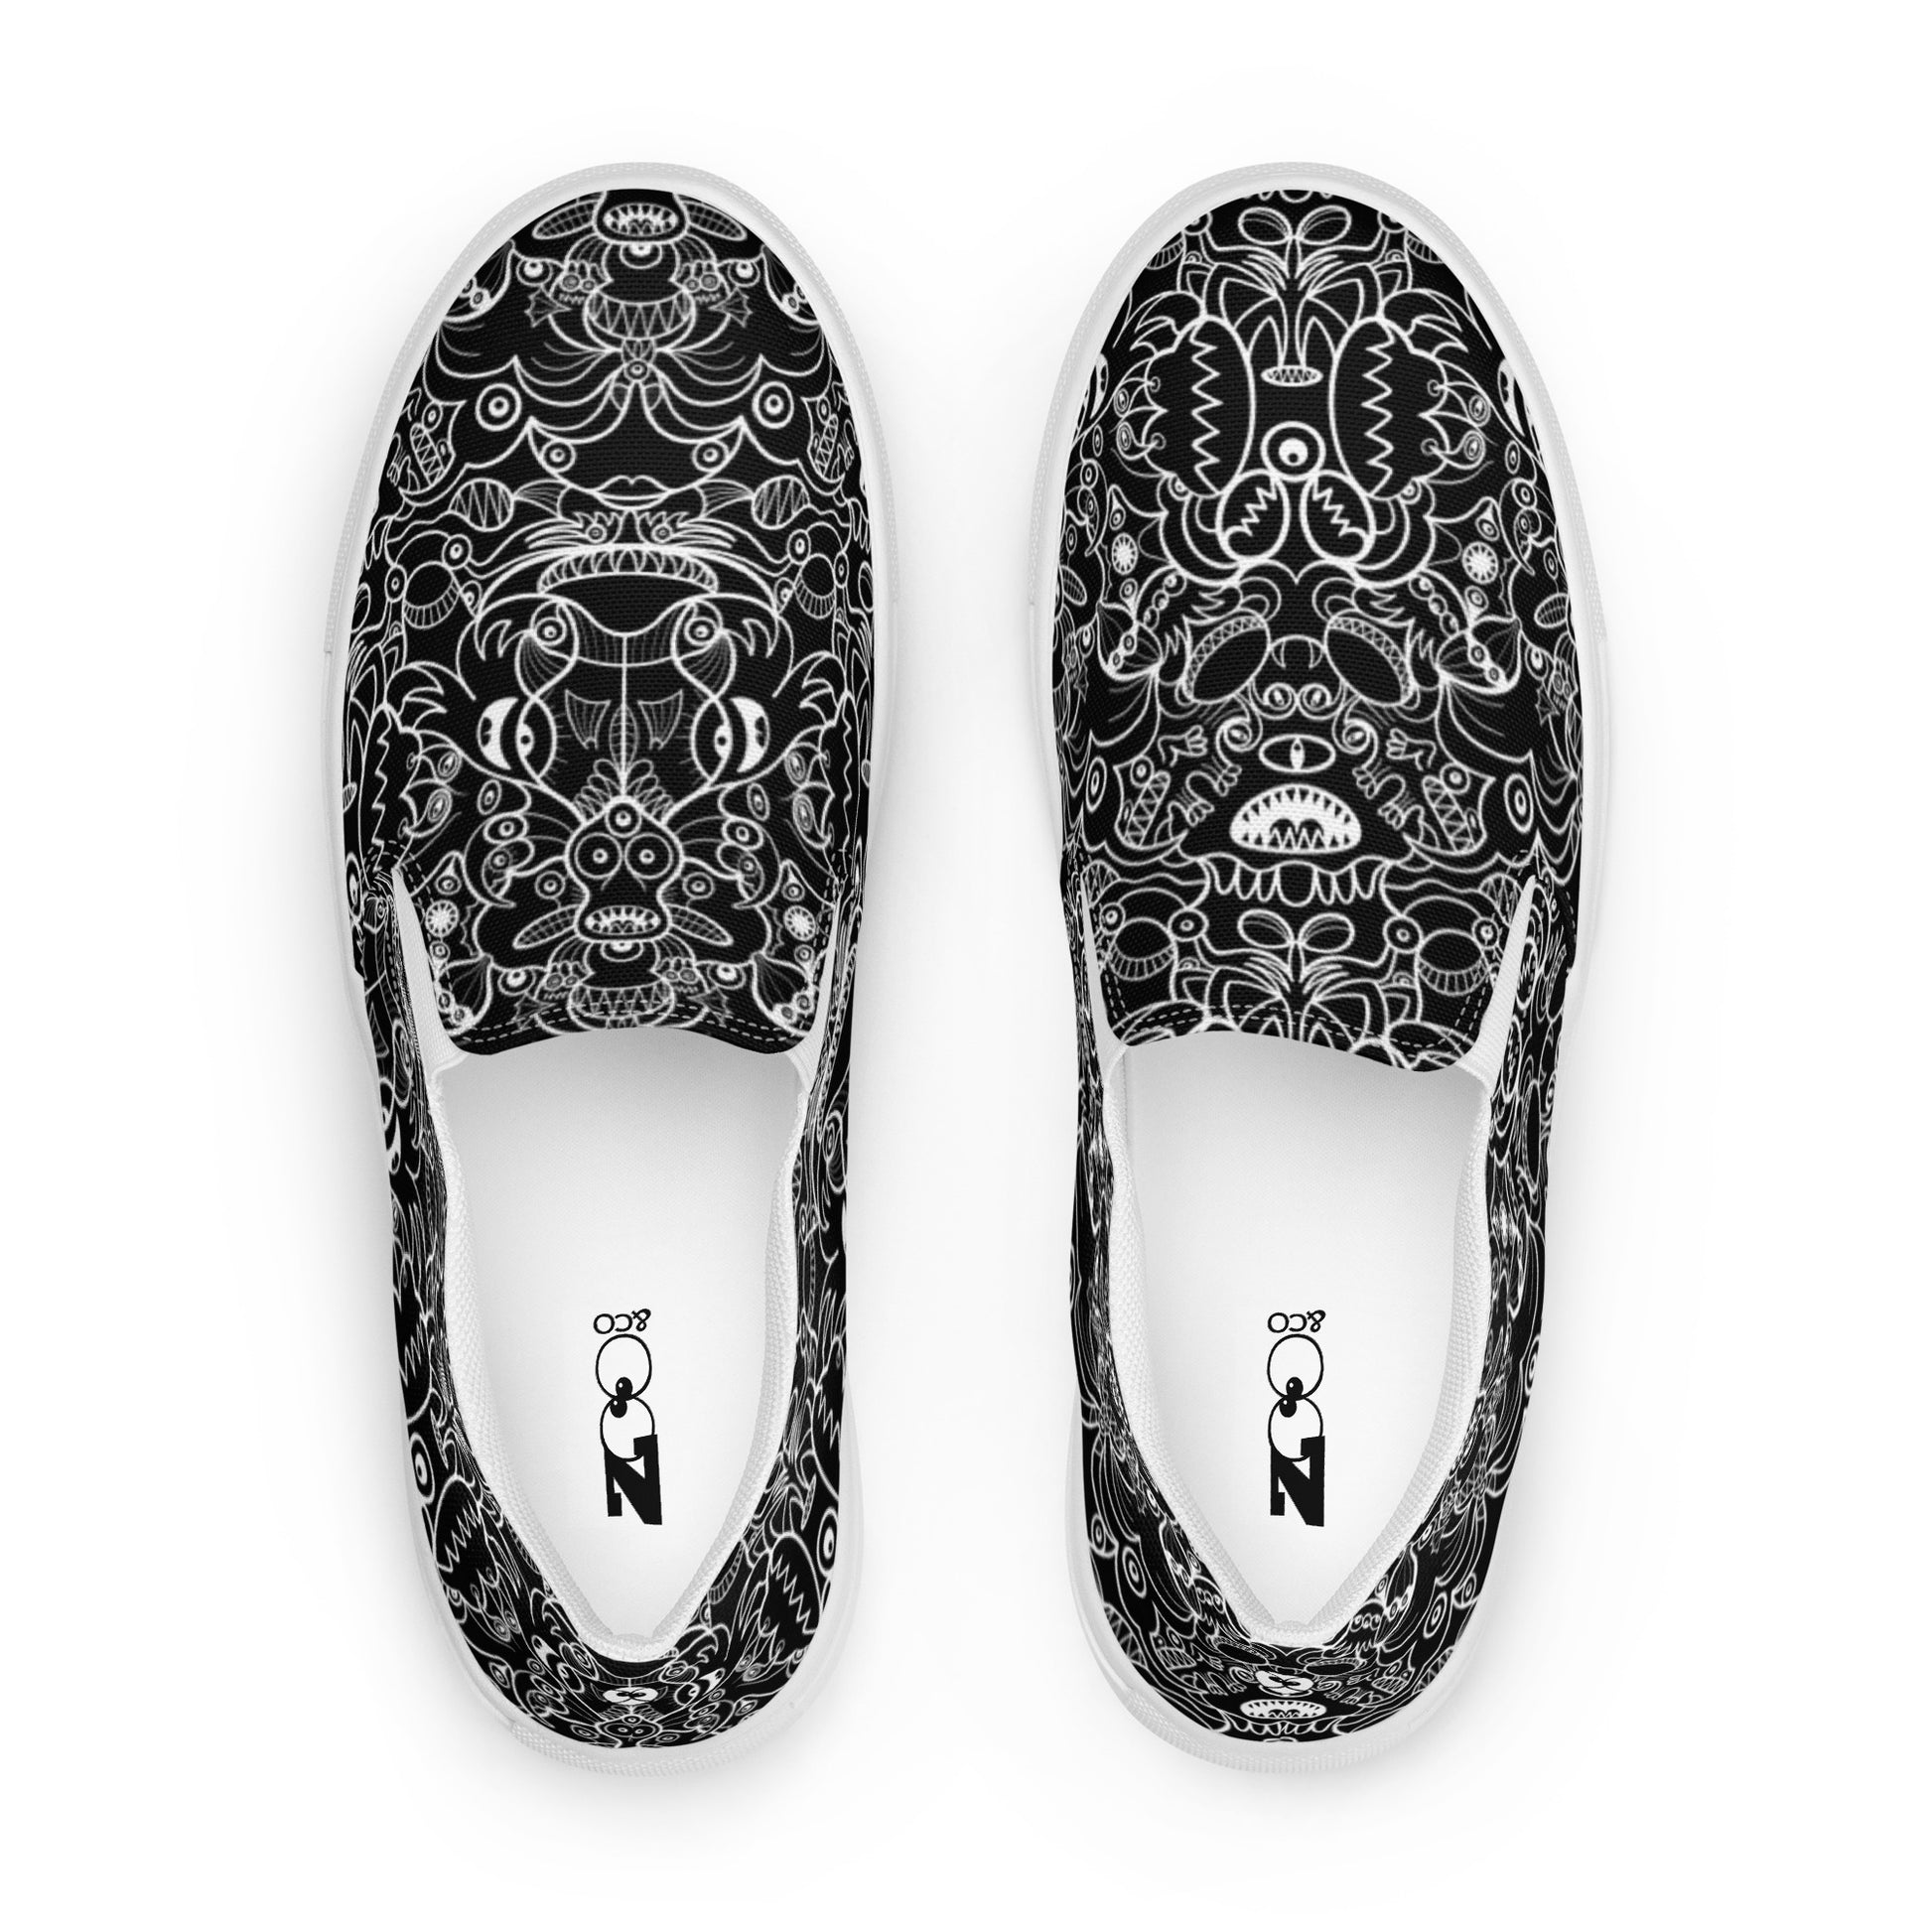 The powerful dark side of the Doodle world Men’s slip-on canvas shoes. Top view